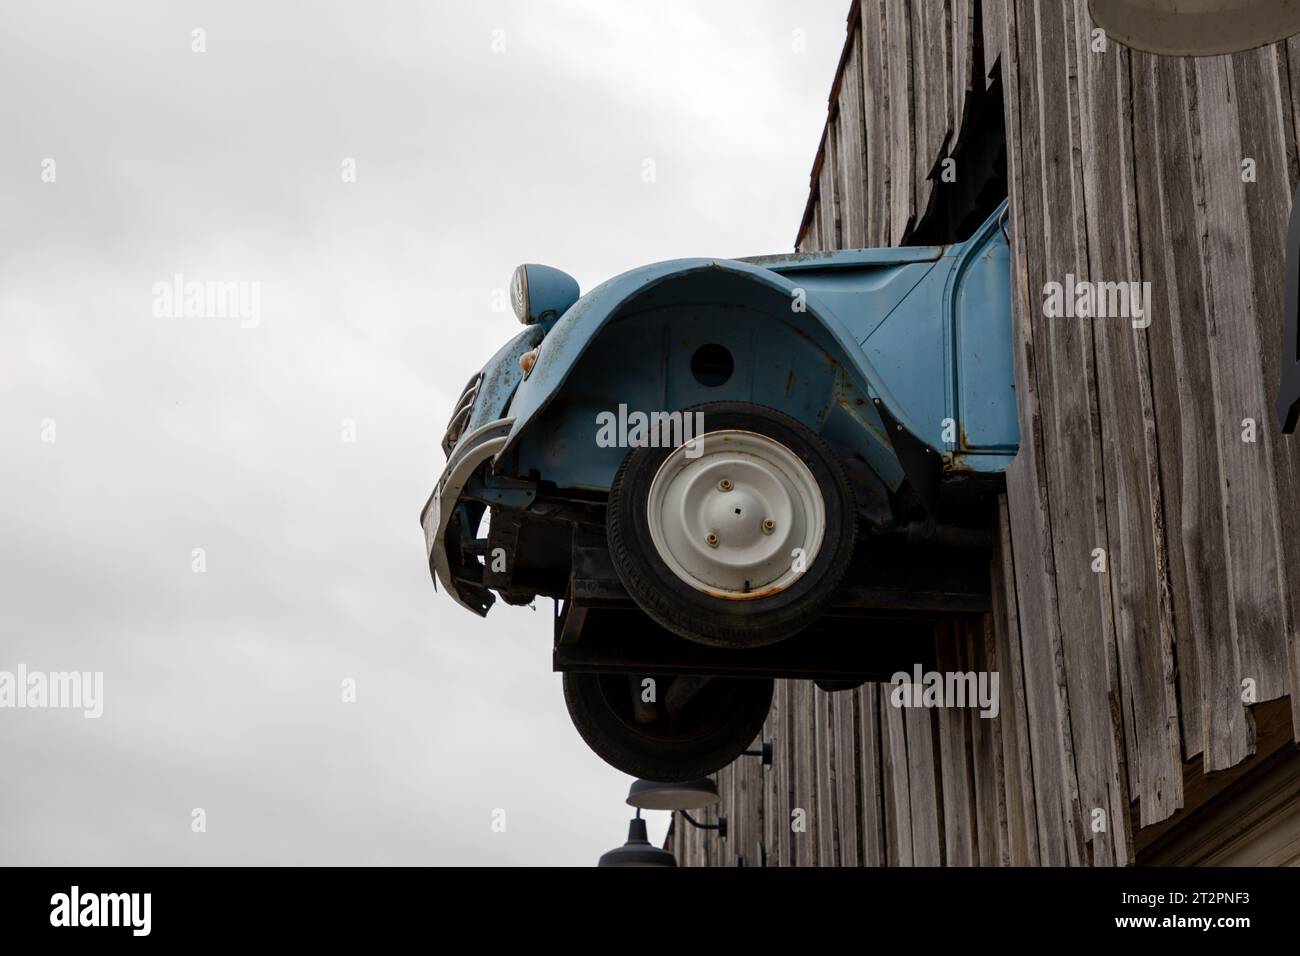 Bordeaux , France - 10 19 2023 : Citroen 2CV old car used as a retro sign vintage french historical vehicle ancient Stock Photo